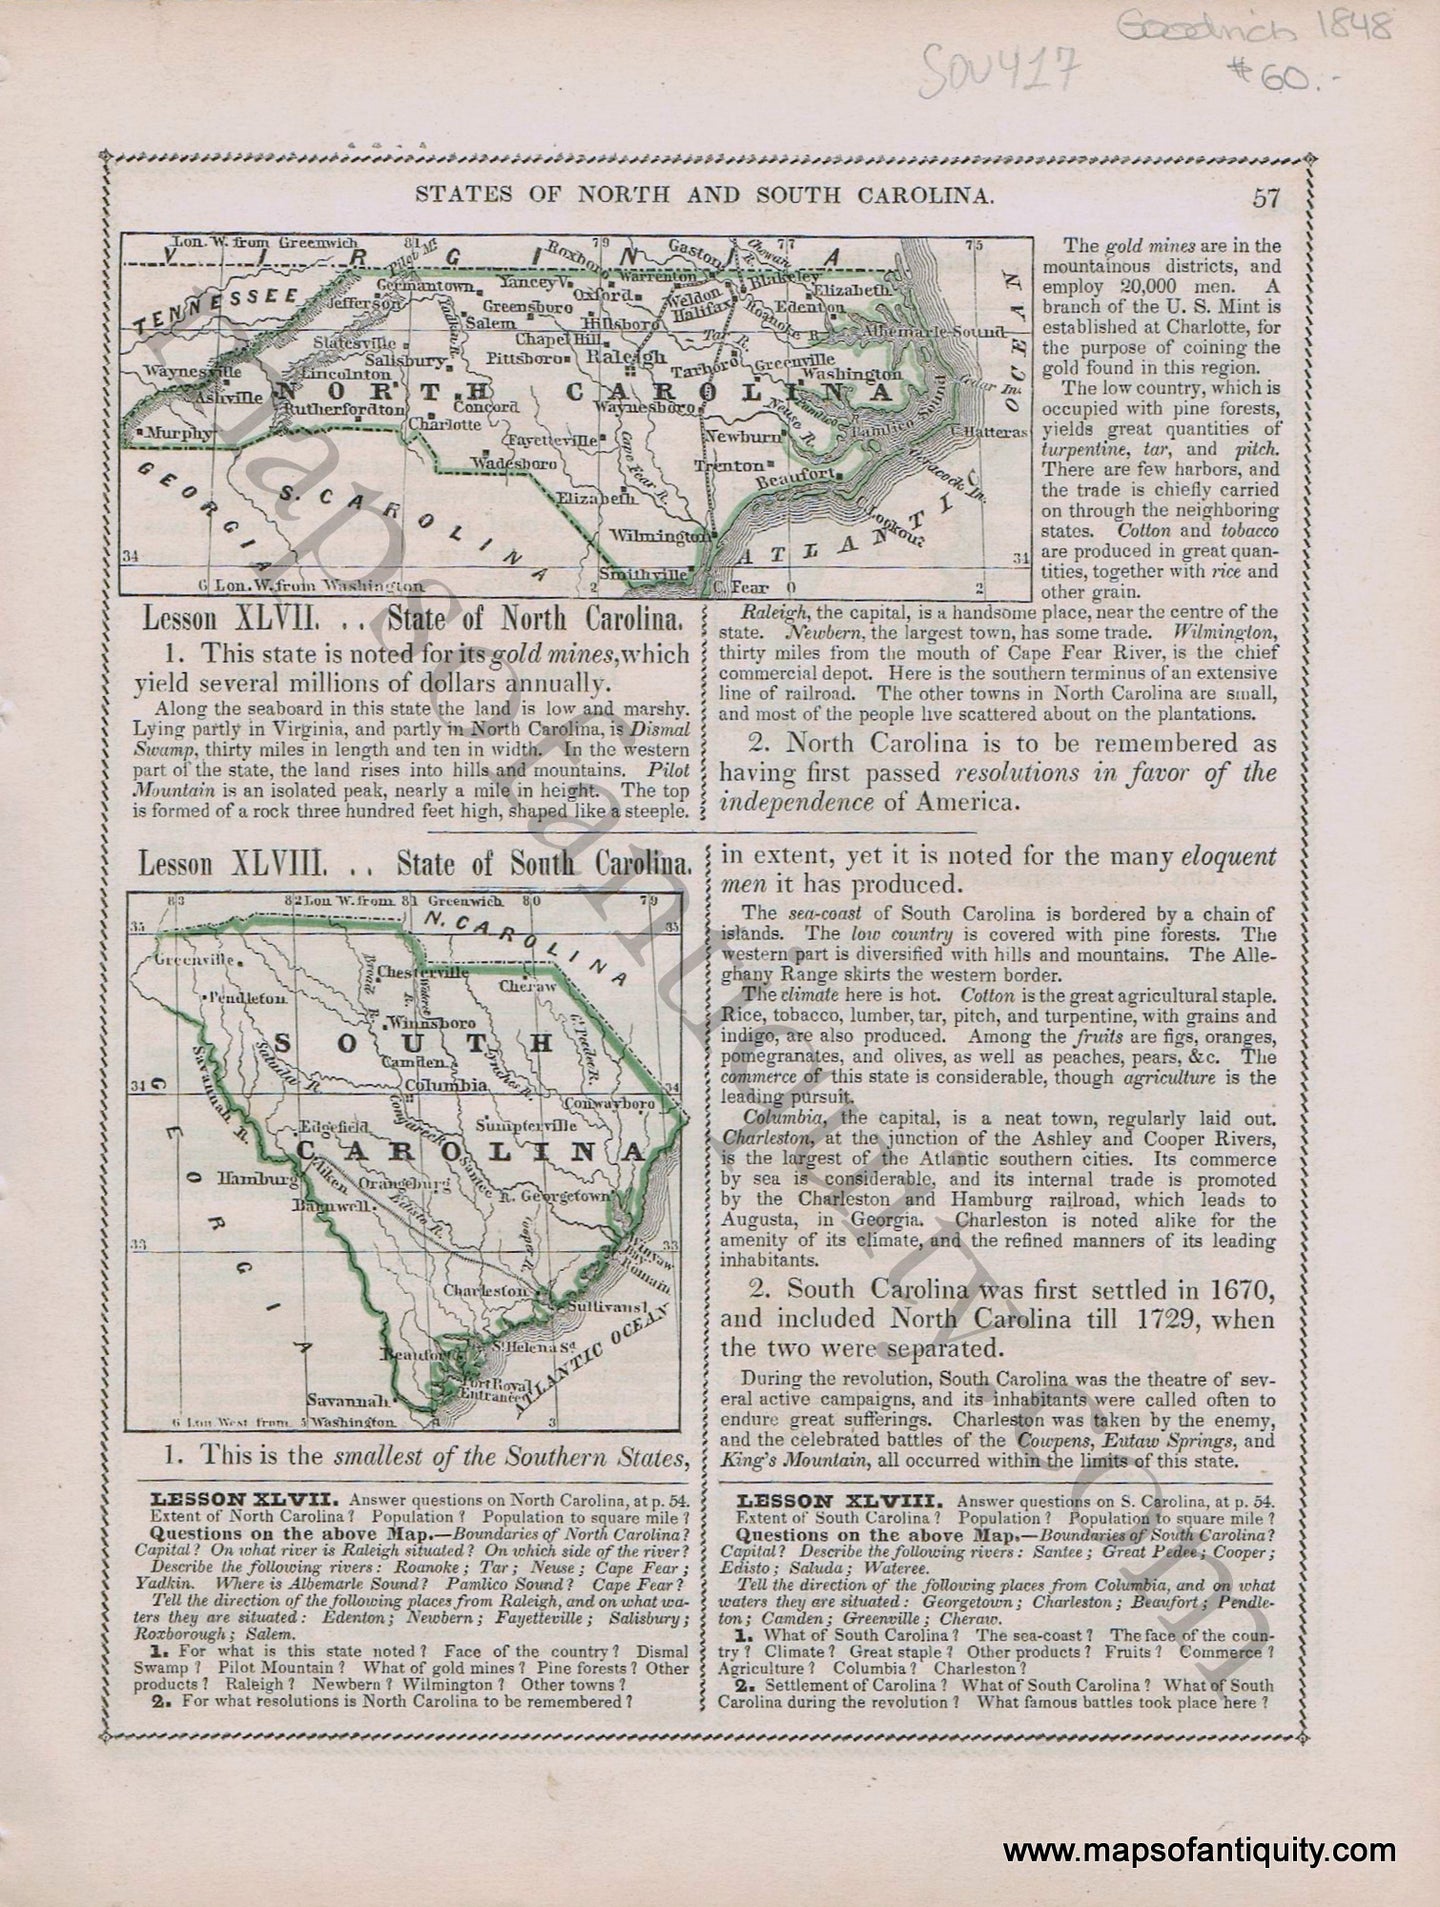 Antique-Printed-Color-Map-States-of-North-and-South-Carolina-verso-States-of-Florida-and-Georgia-1848-Goodrich-United-States-South1800s-19th-century-Maps-of-Antiquity